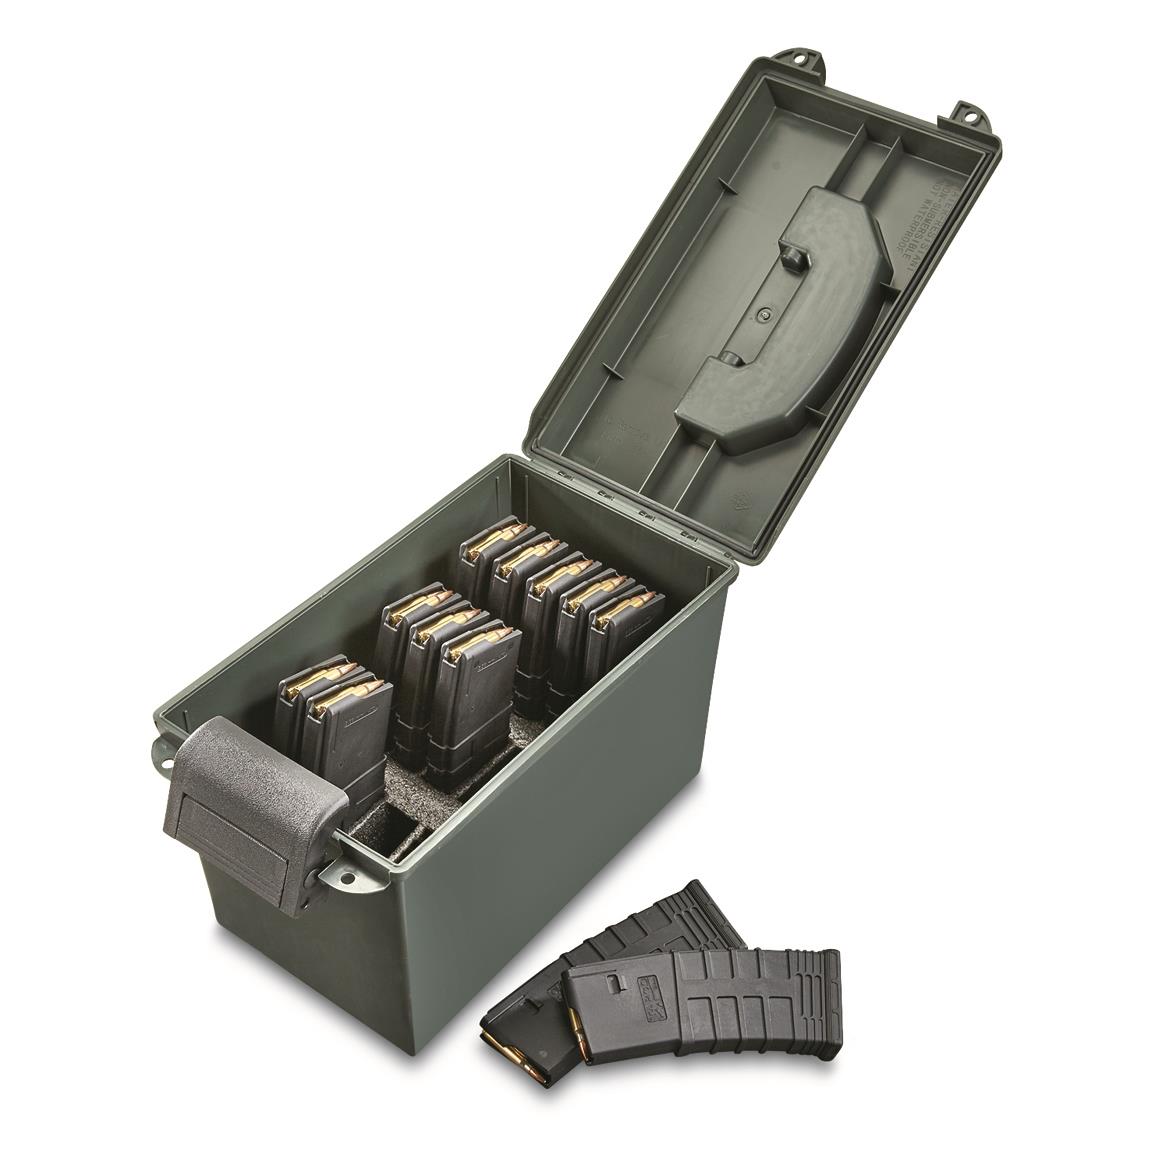 Details about   Magazine Holder Storage Rack 5.56 .223 Mag Storage Solutions Holds 30 Round Mags 